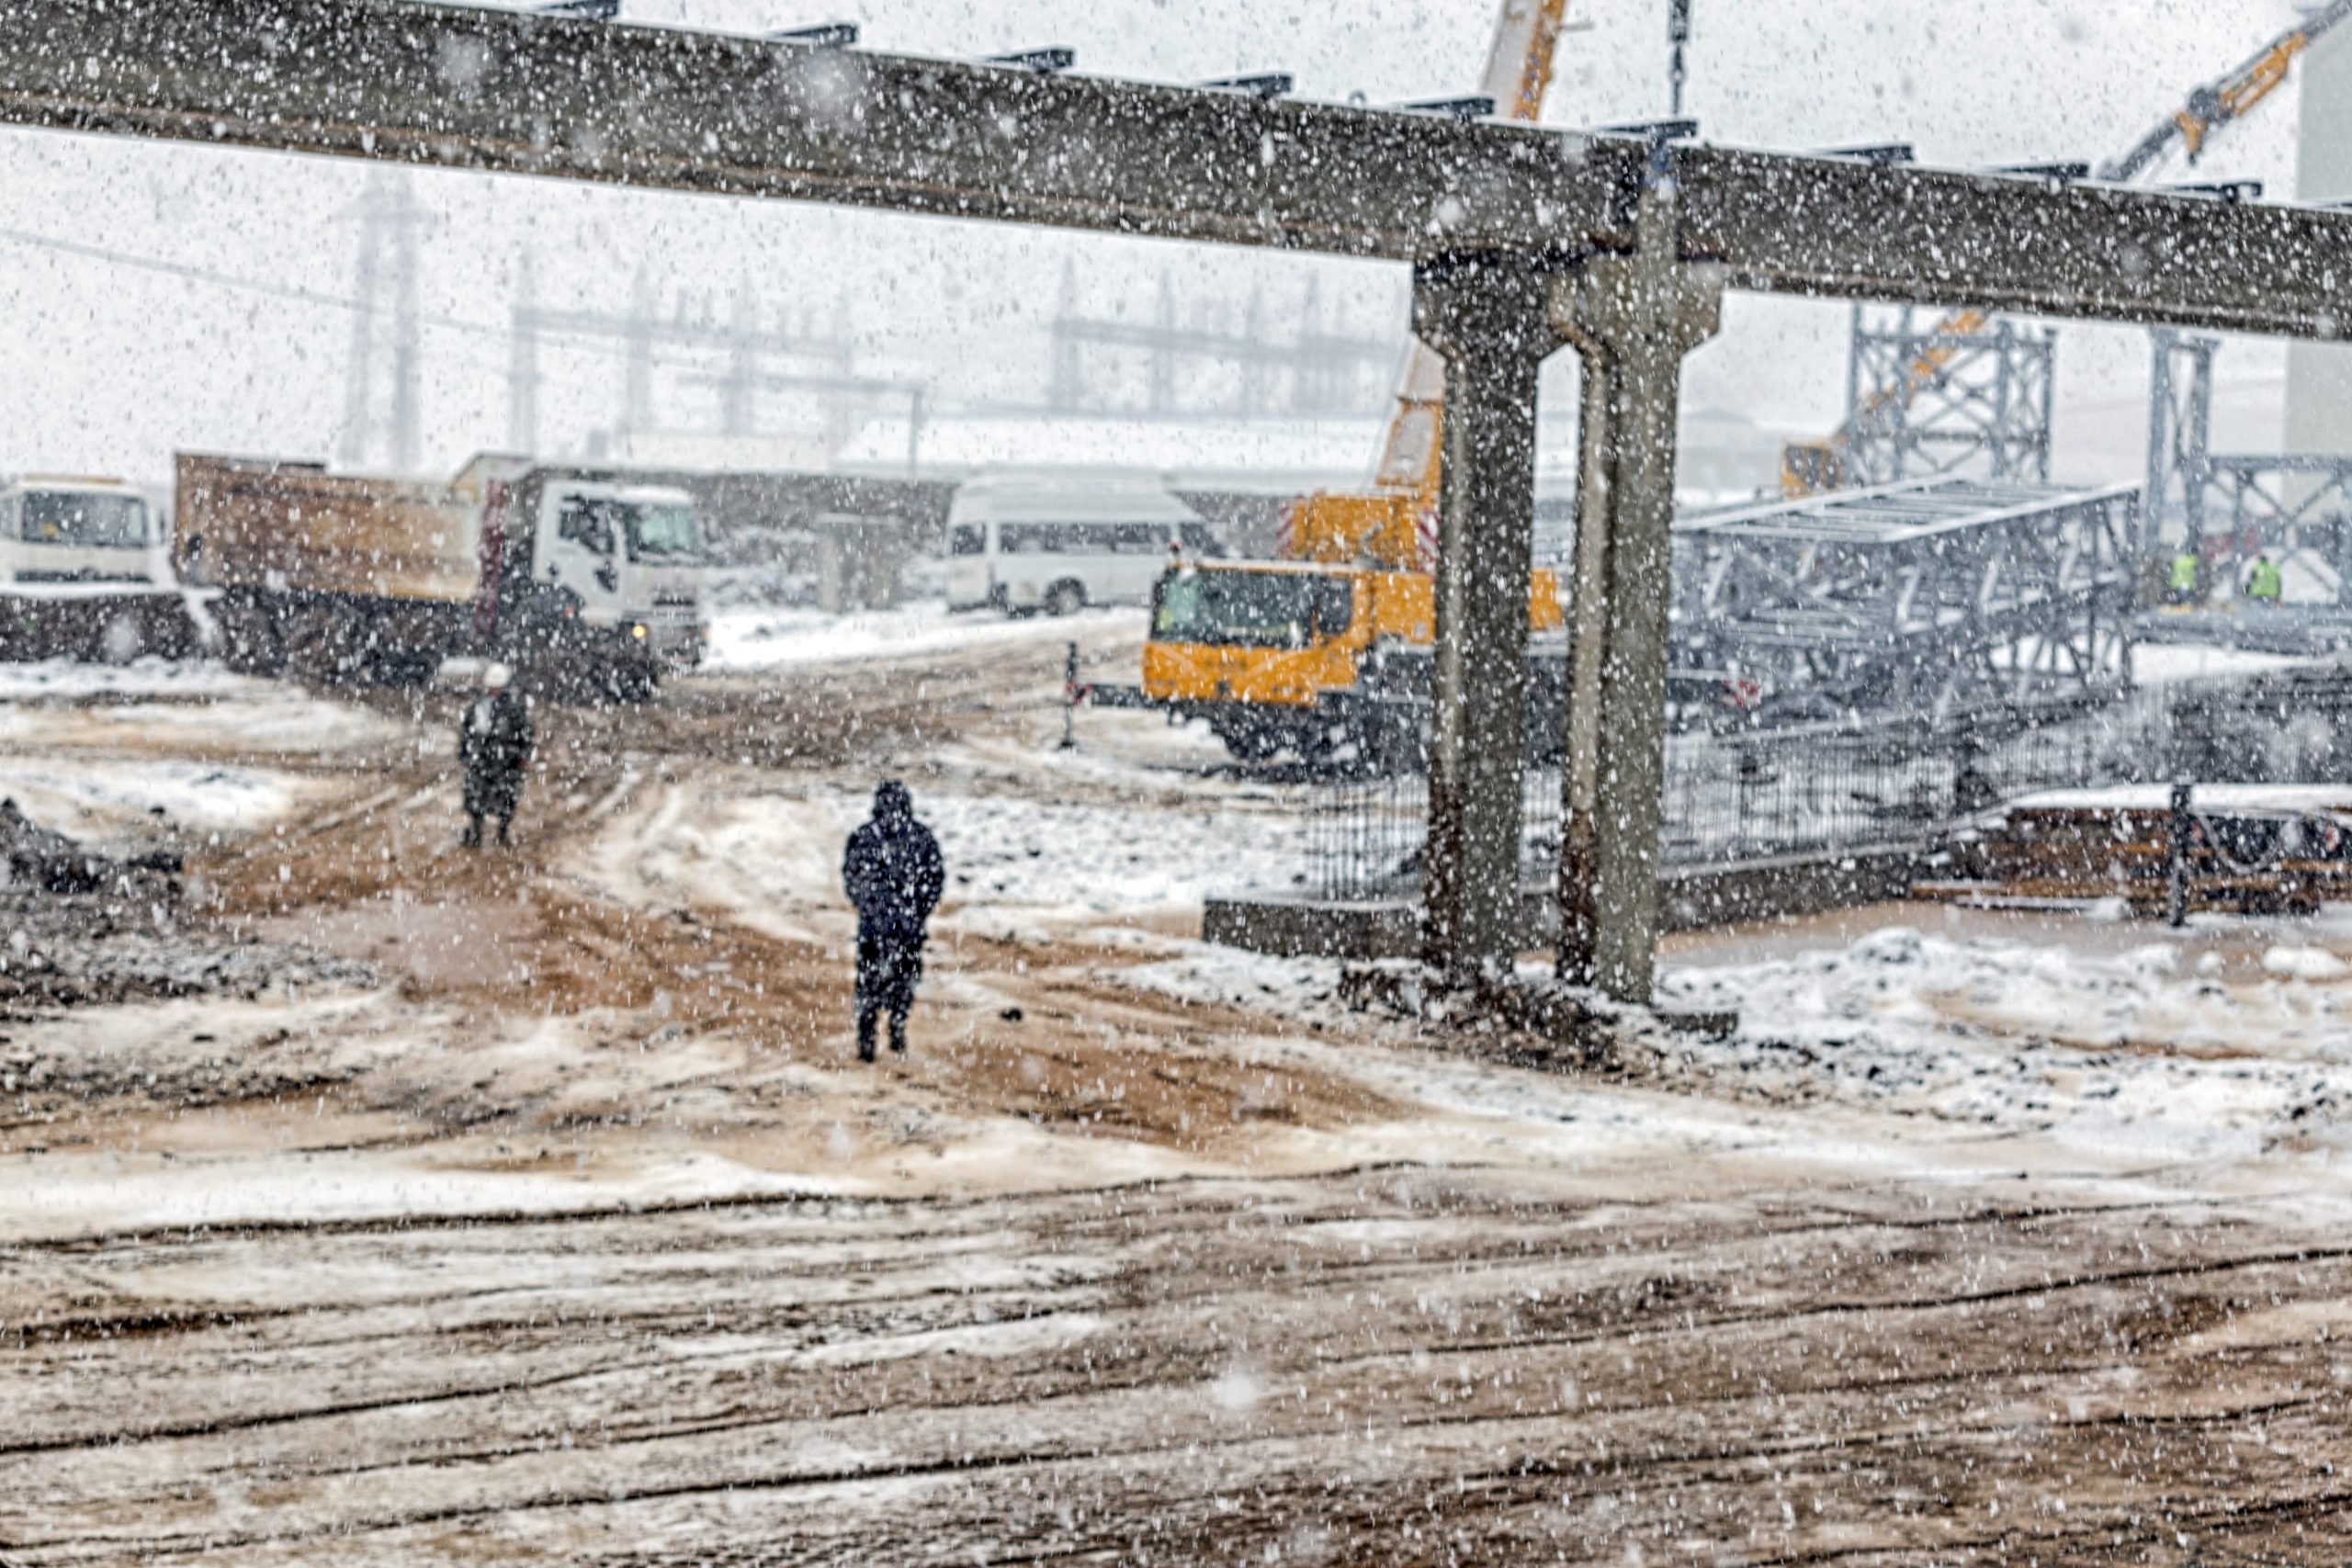 Monitor and Document Weather Conditions on the Jobsite with Construction Cameras